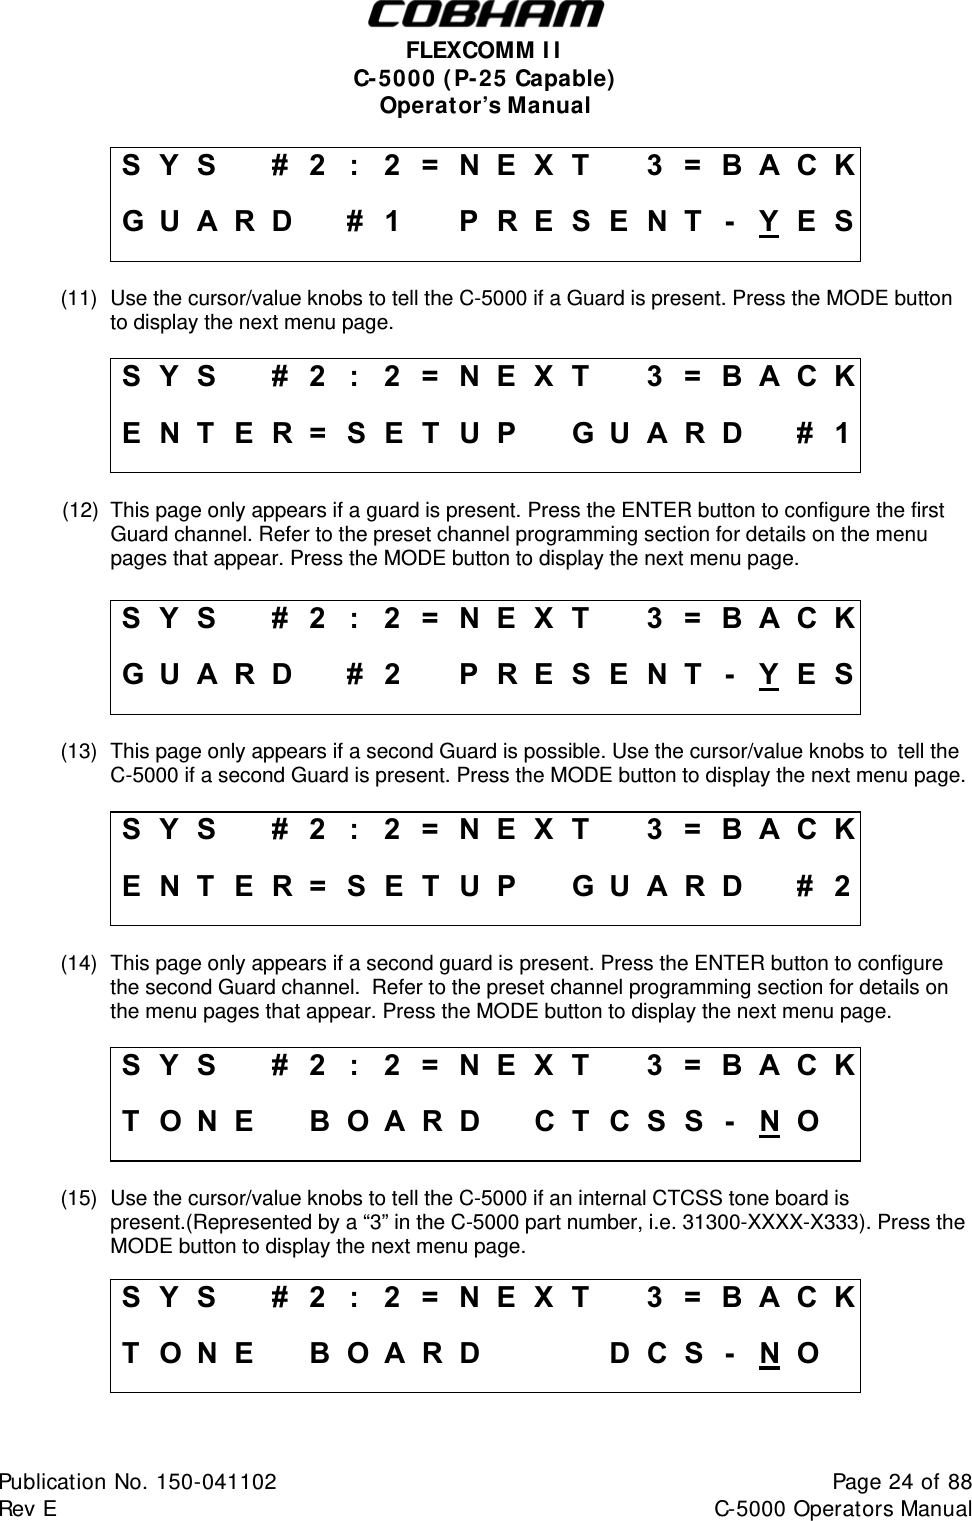  FLEXCOMM I I  C-5000 ( P-25 Capable)  Operator’s Manual S Y S    #  2  :  2 = N E X T   3 = B A C K G U A R D    # 1   PRESENT - Y E S (11)  Use the cursor/value knobs to tell the C-5000 if a Guard is present. Press the MODE button to display the next menu page.  S Y S    #  2  :  2 = N E X T   3 = B A C K E N T E R = SETUP   GUARD    # 1 (12)  This page only appears if a guard is present. Press the ENTER button to configure the first Guard channel. Refer to the preset channel programming section for details on the menu pages that appear. Press the MODE button to display the next menu page.  S Y S    #  2  :  2 = N E X T   3 = B A C K G U A R D    # 2   PRESENT - Y E S (13)  This page only appears if a second Guard is possible. Use the cursor/value knobs to  tell the C-5000 if a second Guard is present. Press the MODE button to display the next menu page.  S Y S    #  2  :  2 = N E X T   3 = B A C K E N T E R = SETUP   GUARD    # 2 (14)  This page only appears if a second guard is present. Press the ENTER button to configure the second Guard channel.  Refer to the preset channel programming section for details on the menu pages that appear. Press the MODE button to display the next menu page.  S Y S    #  2  :  2 = N E X T   3 = B A C K T O N E    B OARD   CT CSS - N O   (15)  Use the cursor/value knobs to tell the C-5000 if an internal CTCSS tone board is present.(Represented by a “3” in the C-5000 part number, i.e. 31300-XXXX-X333). Press the MODE button to display the next menu page. S Y S    #  2  :  2 = N E X T   3 = B A C K T O N E    B OARD       DCS - N O      Publication No. 150-041102  Page 24 of 88  Rev E  C-5000 Operators Manual    